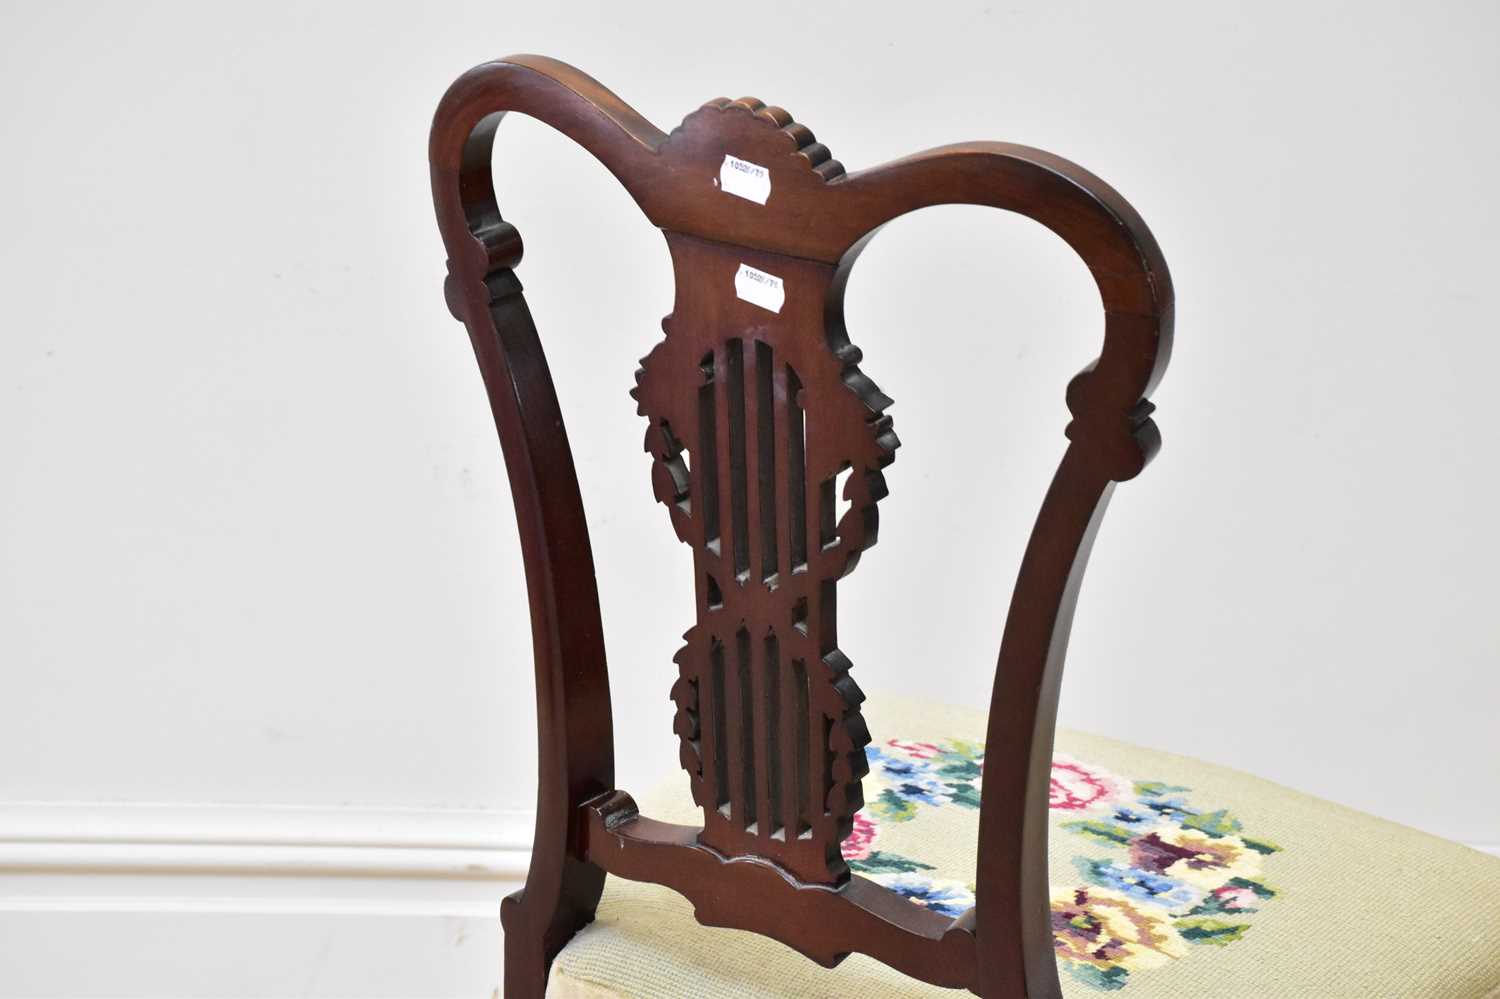 An Edwardian mahogany framed side chair, with carved open pierced back and floral woolwork seat. - Image 3 of 3